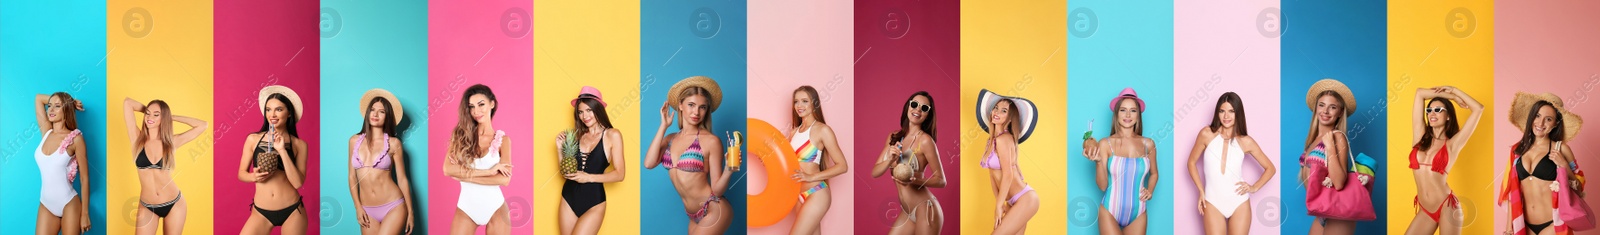 Image of Collage with beautiful photos themed to summer party and vacation. Pretty young women wearing swimsuits on different color backgrounds, banner design